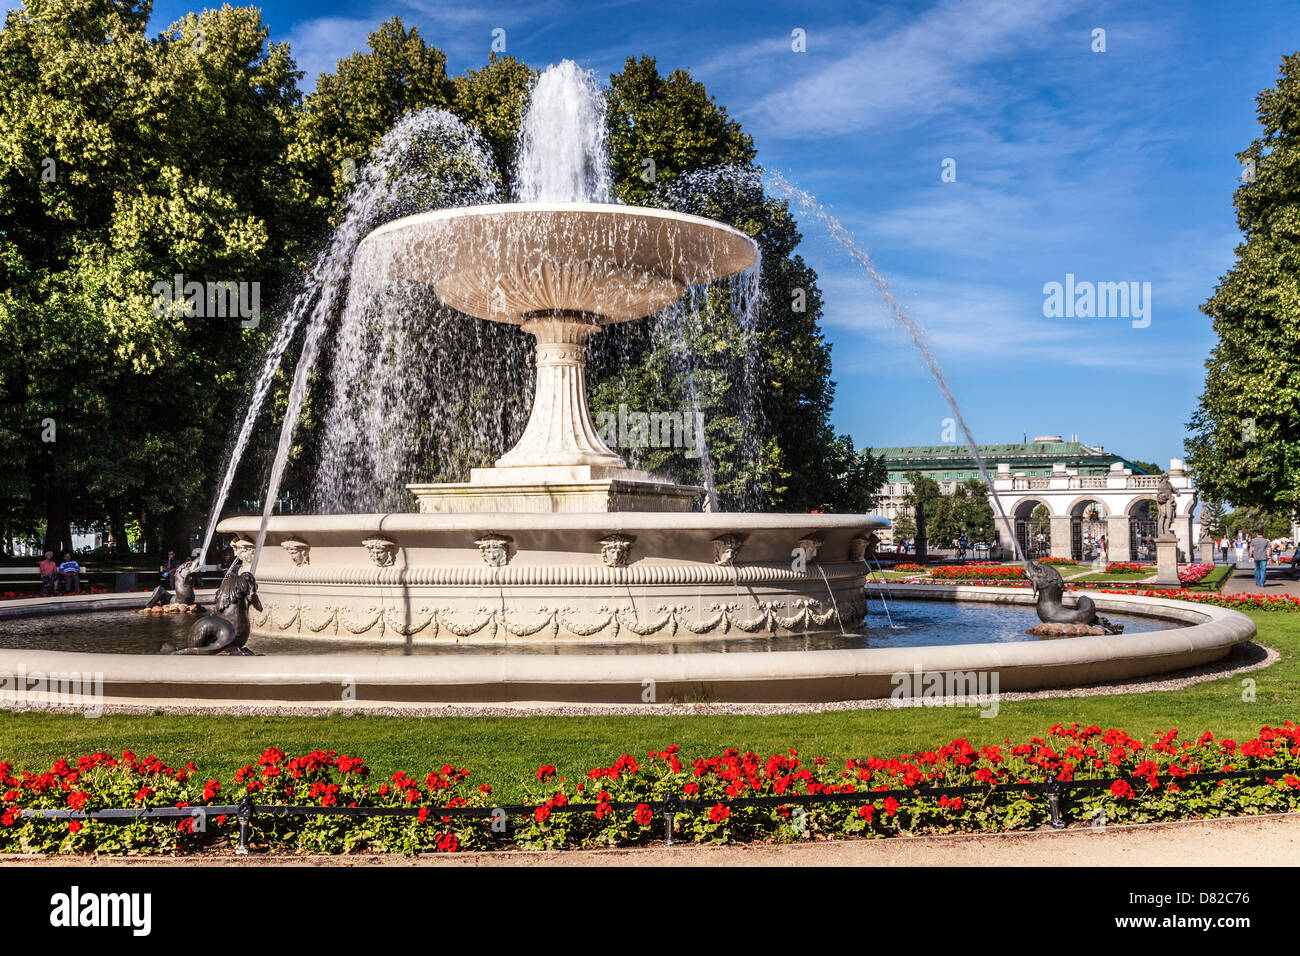 Fountain in Ogród Saski, Saxon Garden, oldest park in Warsaw with the Tomb of the Unknown Soldier in Pilsudski Square beyond. Stock Photo